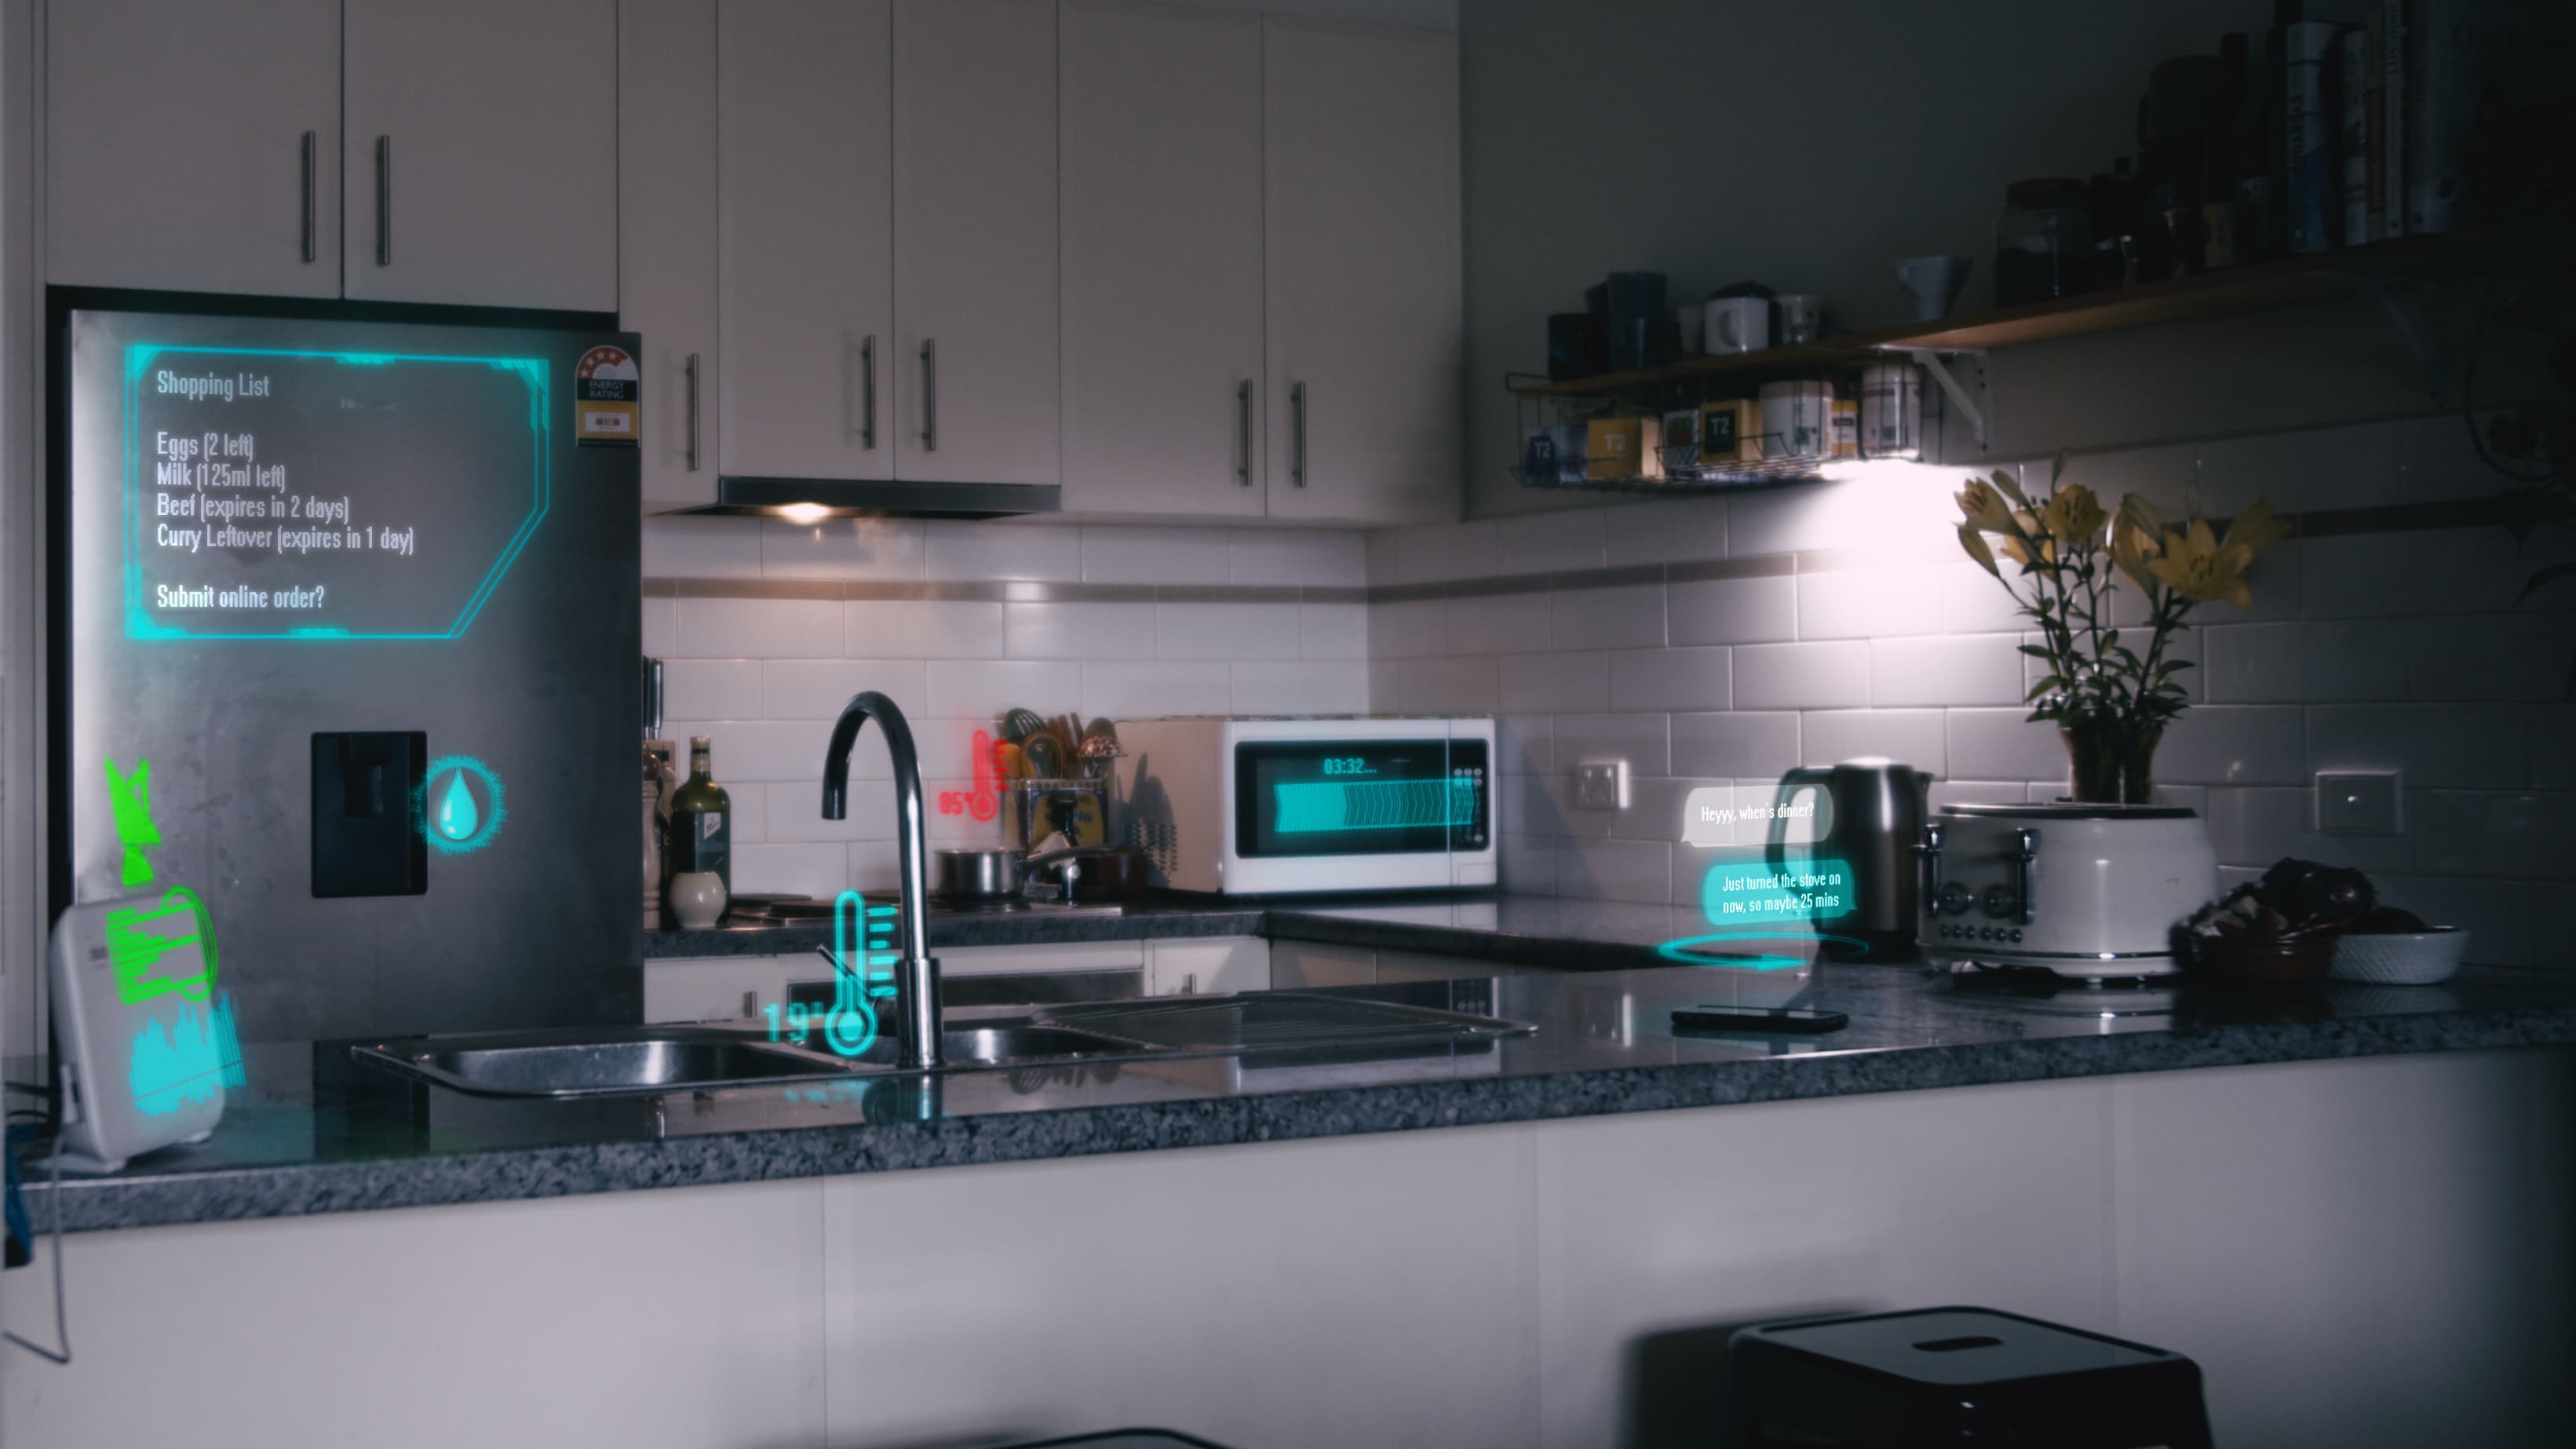 An image of a kitchen with holographic interfaces on various appliances, providing information about e.g. the contents of the fridge, the food in the microwave, the temperature of the tap water.